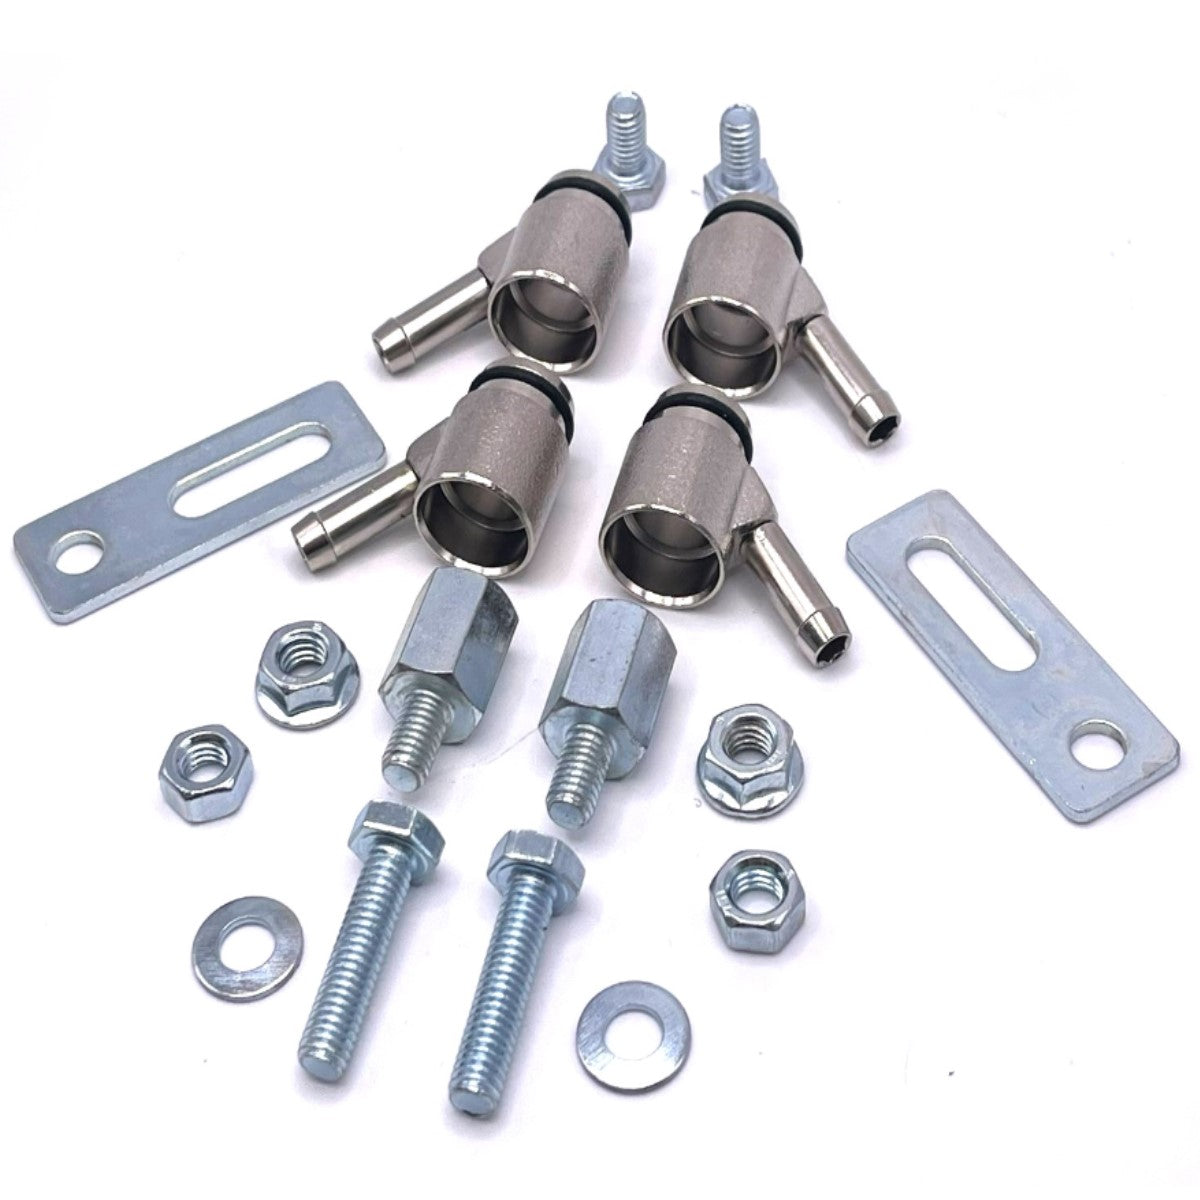 ‘QUICK FIT’ GAS FEED, 4CYL KIT, BOSCH INJECTOR – Ø14 / Ø5 - 1 O RING